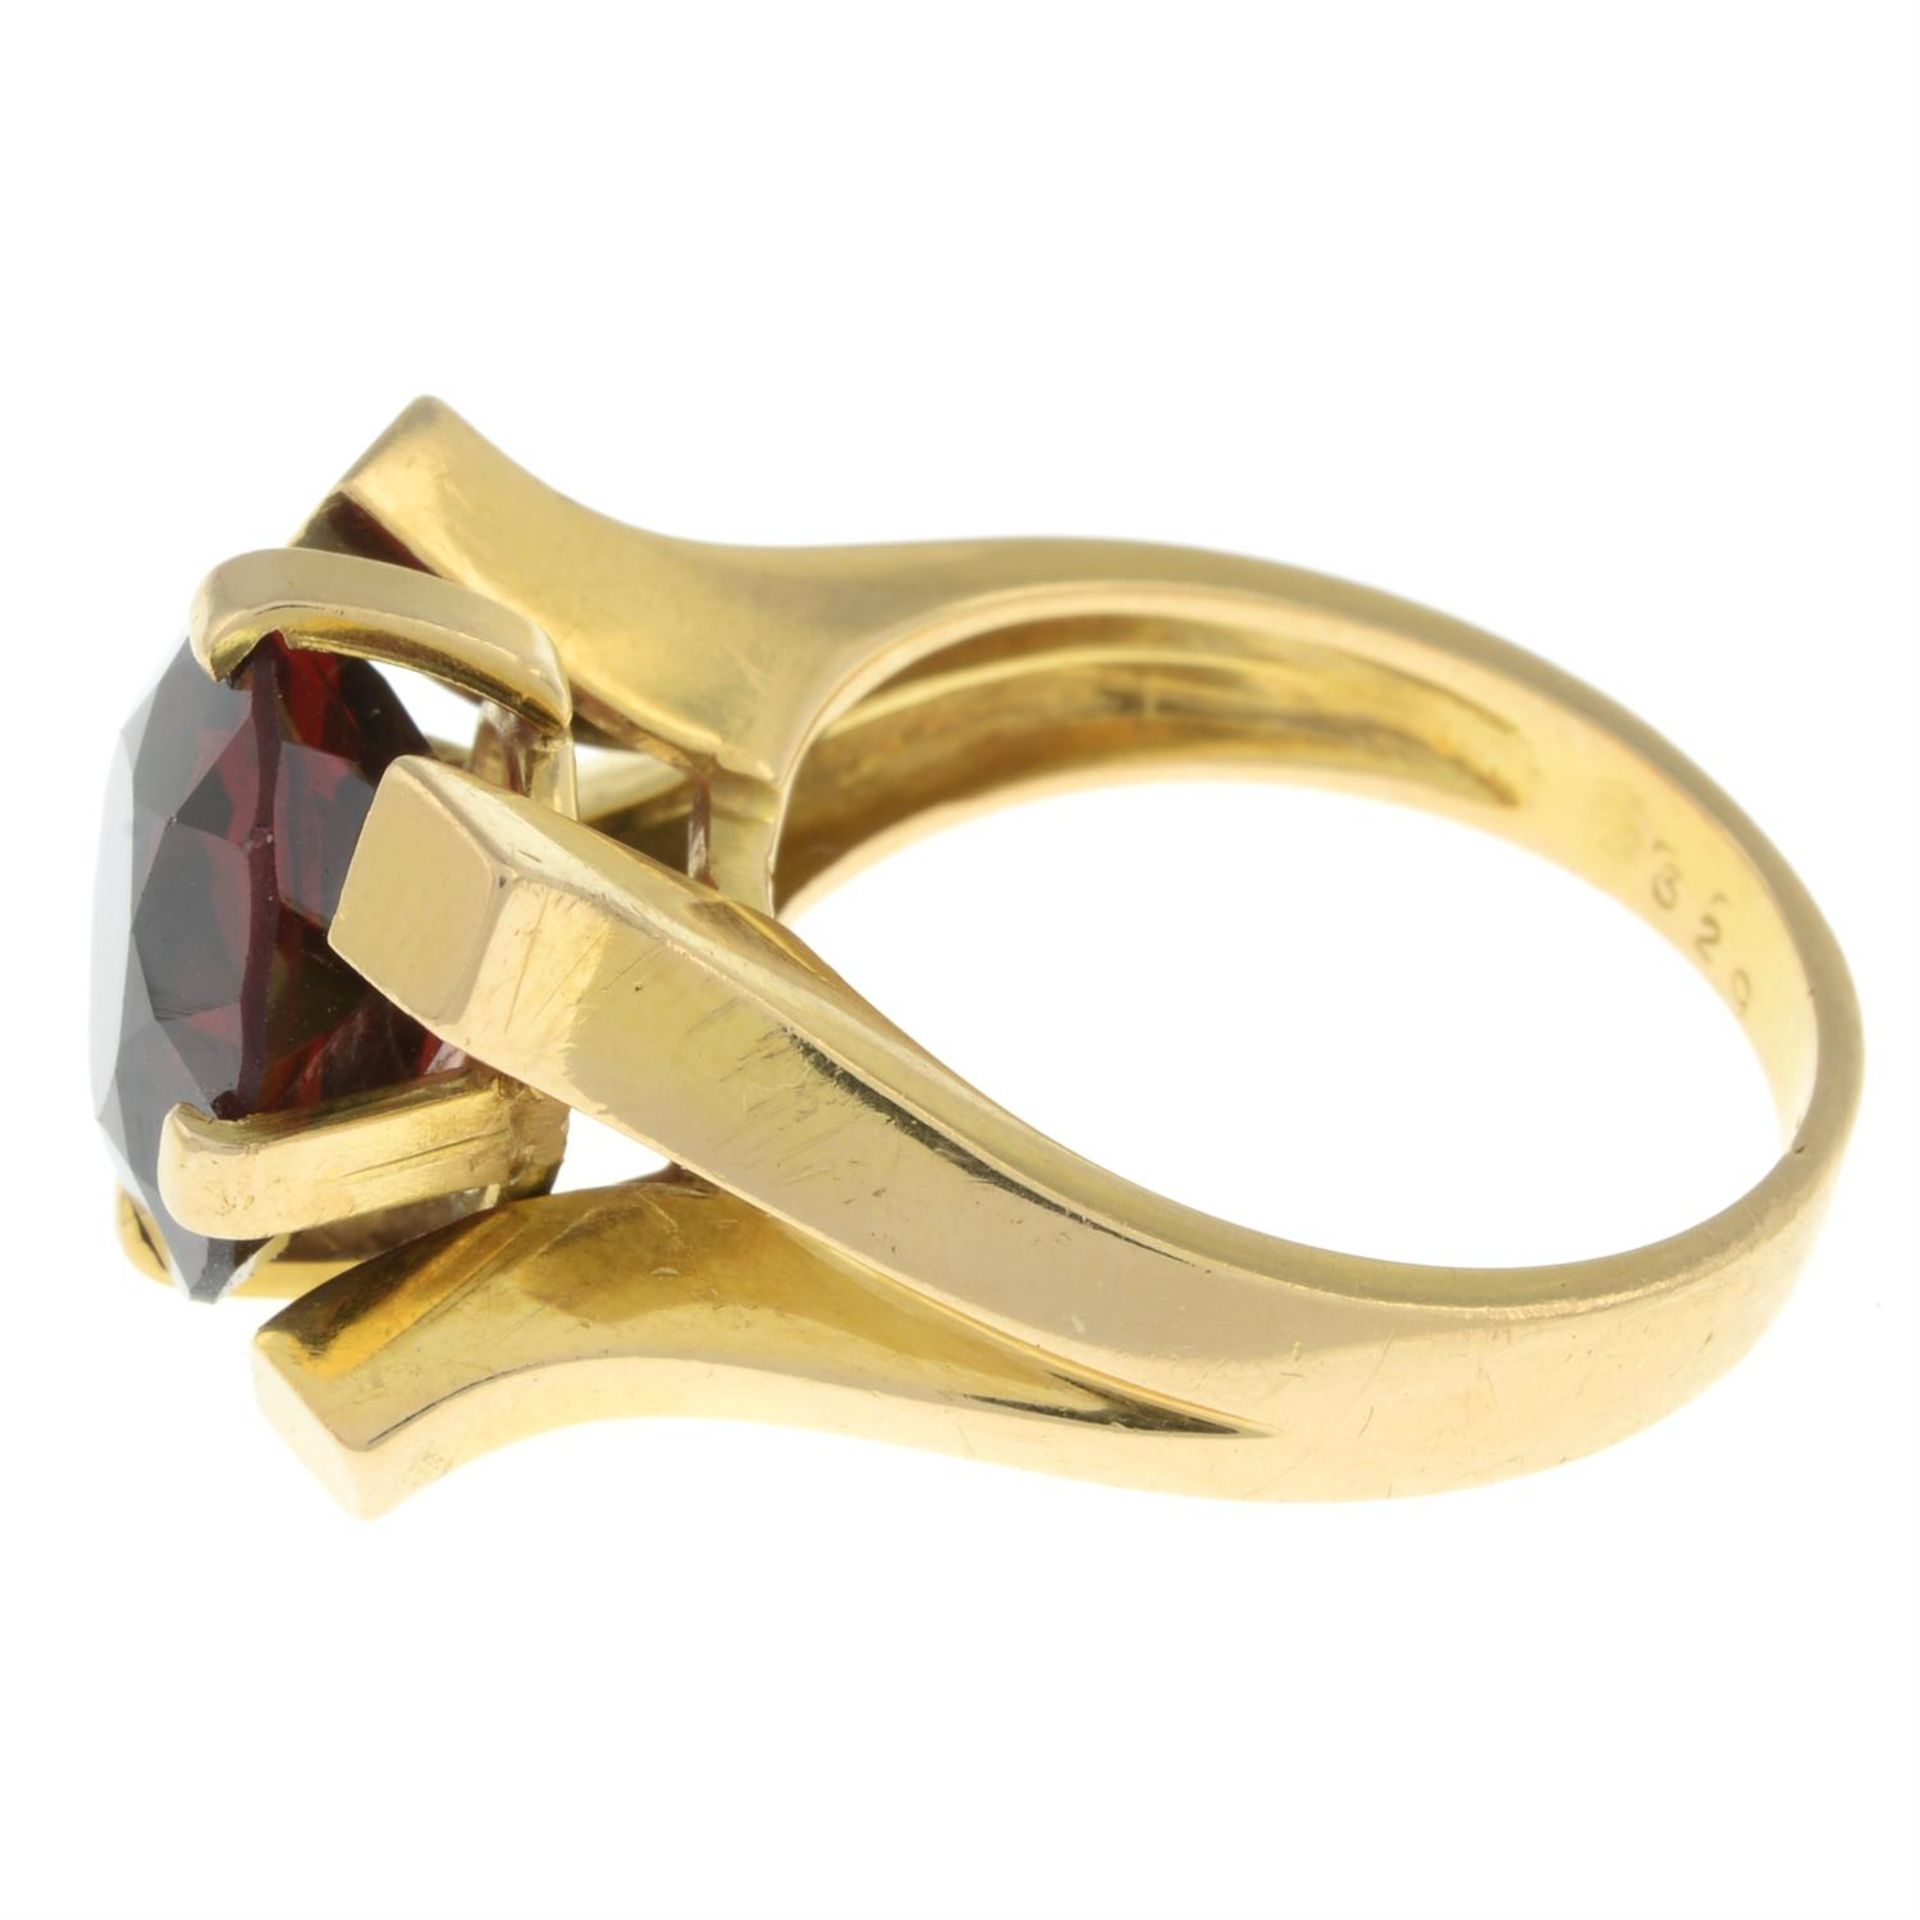 Mid 20th century 18ct gold citrine ring - Image 4 of 5